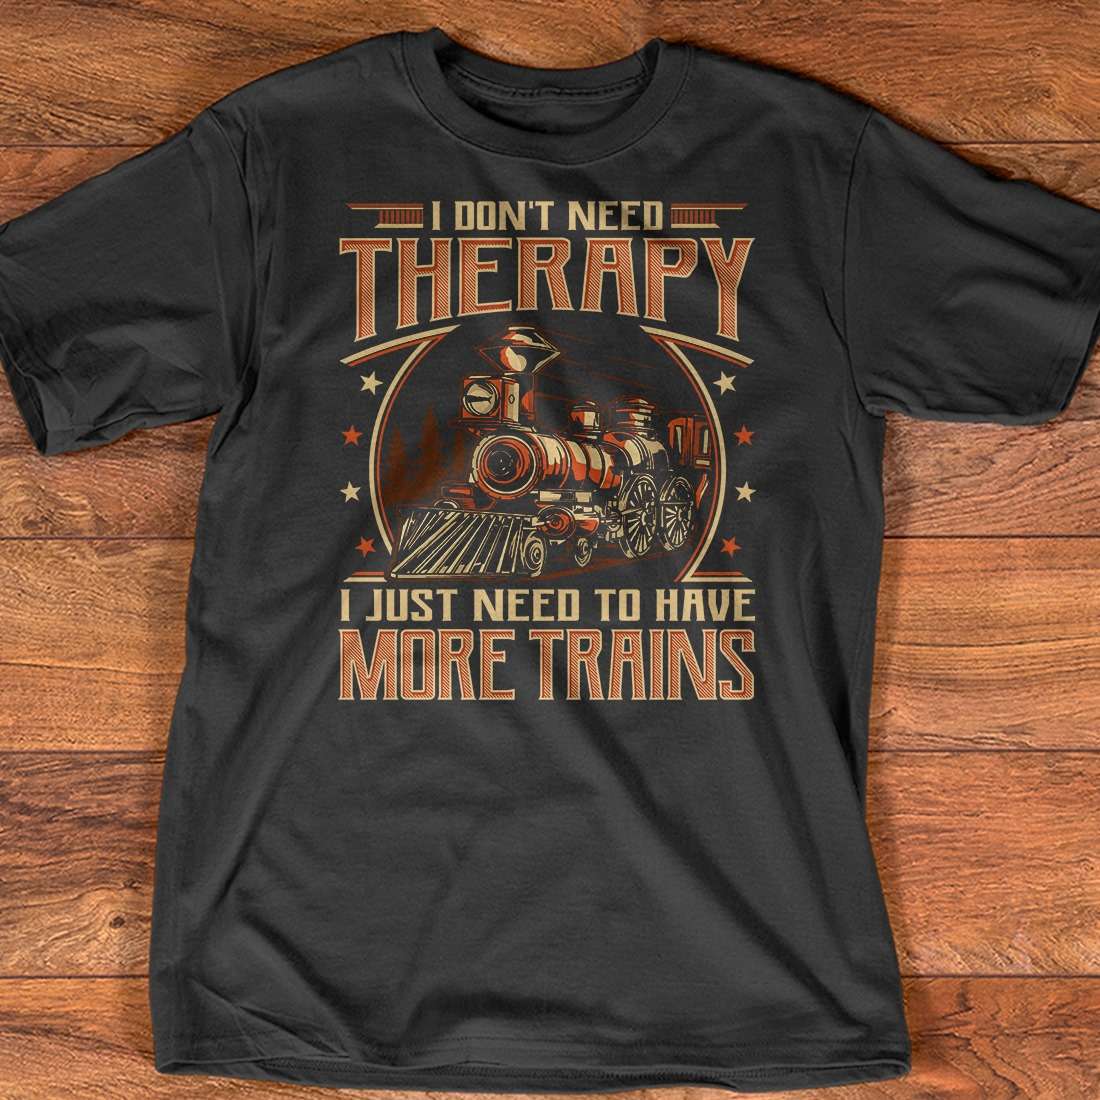 I don't need therapy I just need to have more trains - Train lover gift